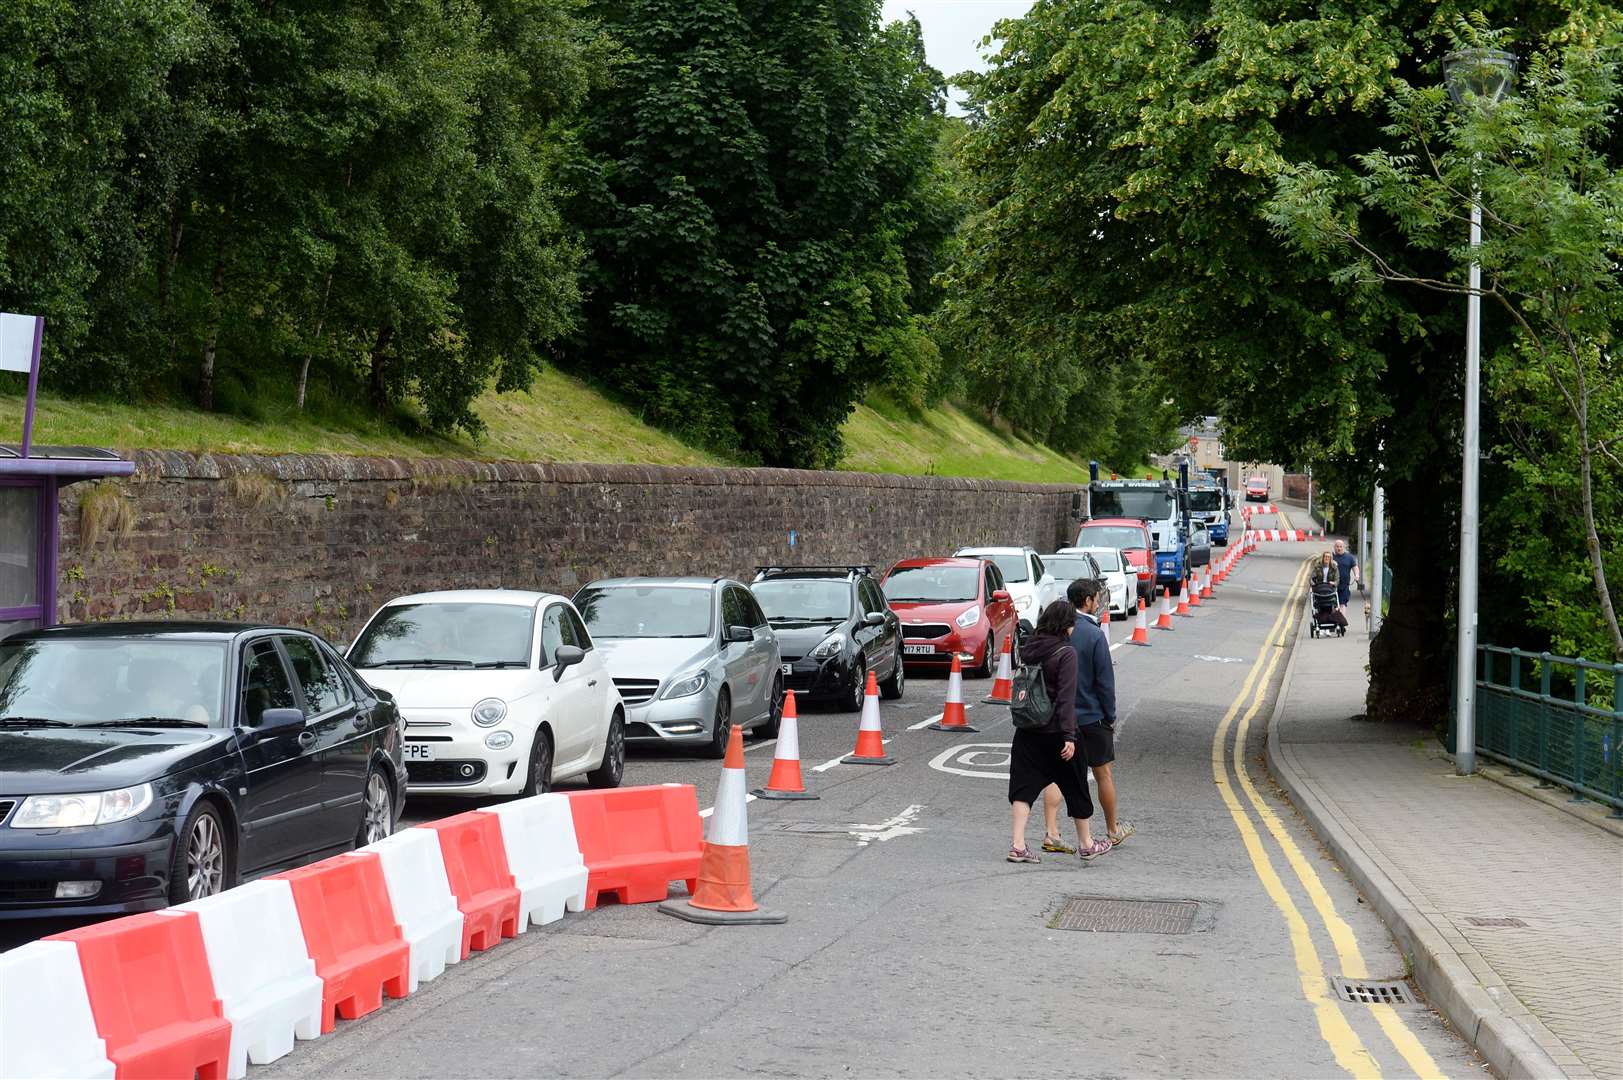 Measures to limit traffic around the castle to a one-way route were not popular with many residents during Covid restrictions.